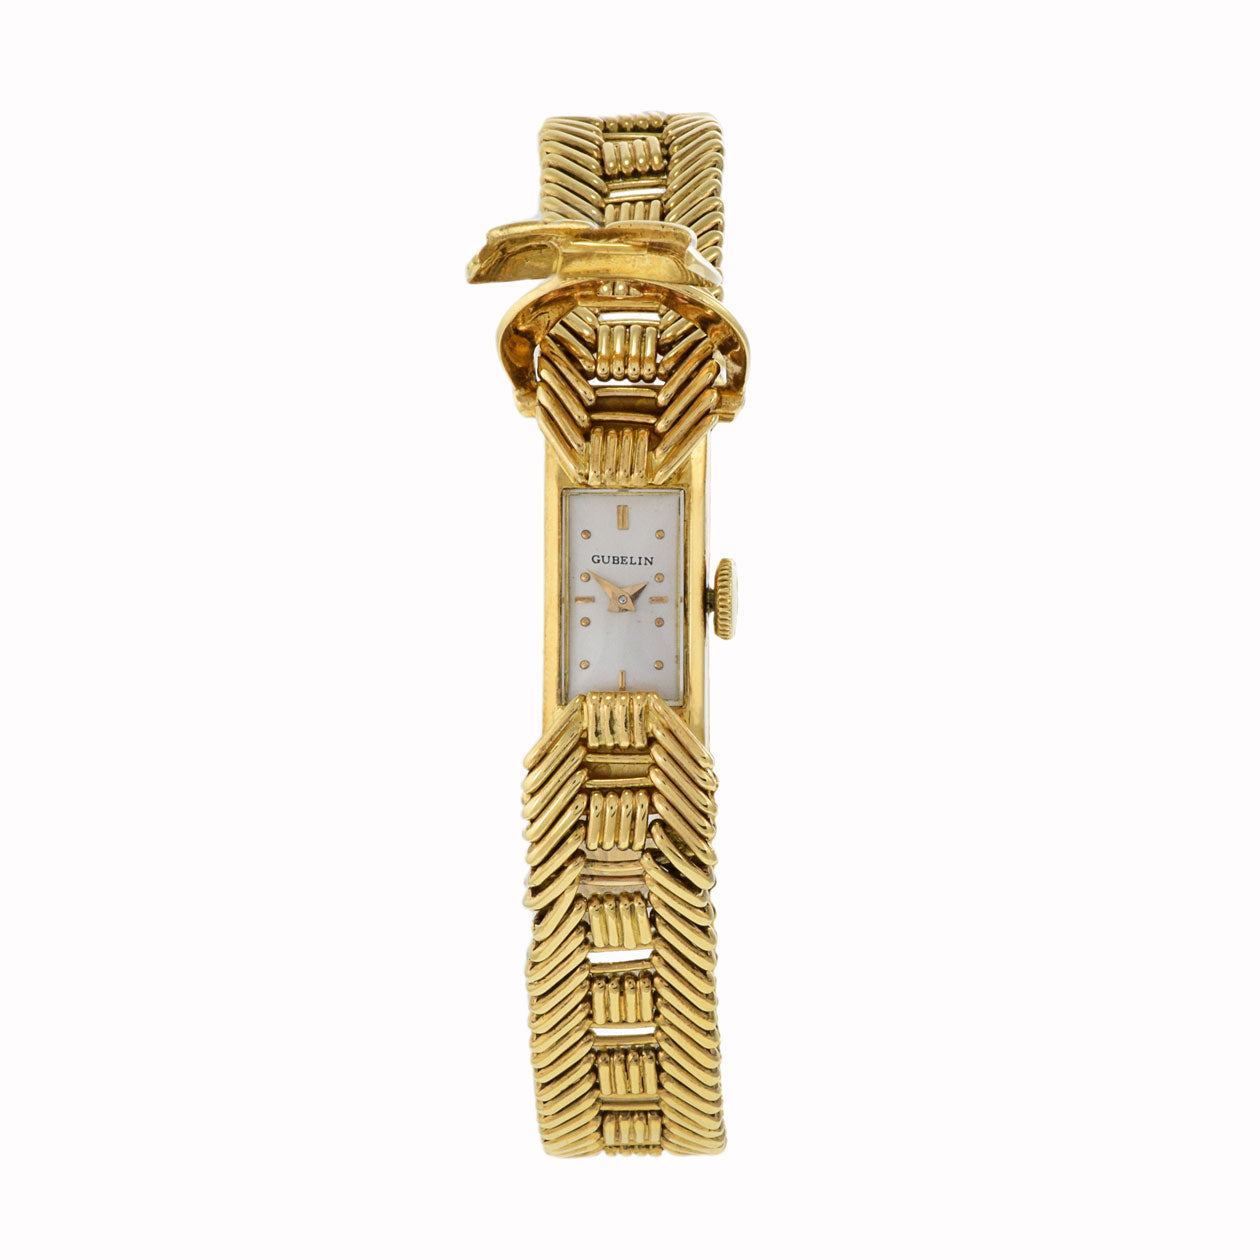 Gubelin 1960's Ladies 18KT Yellow Gold Cocktail Watch